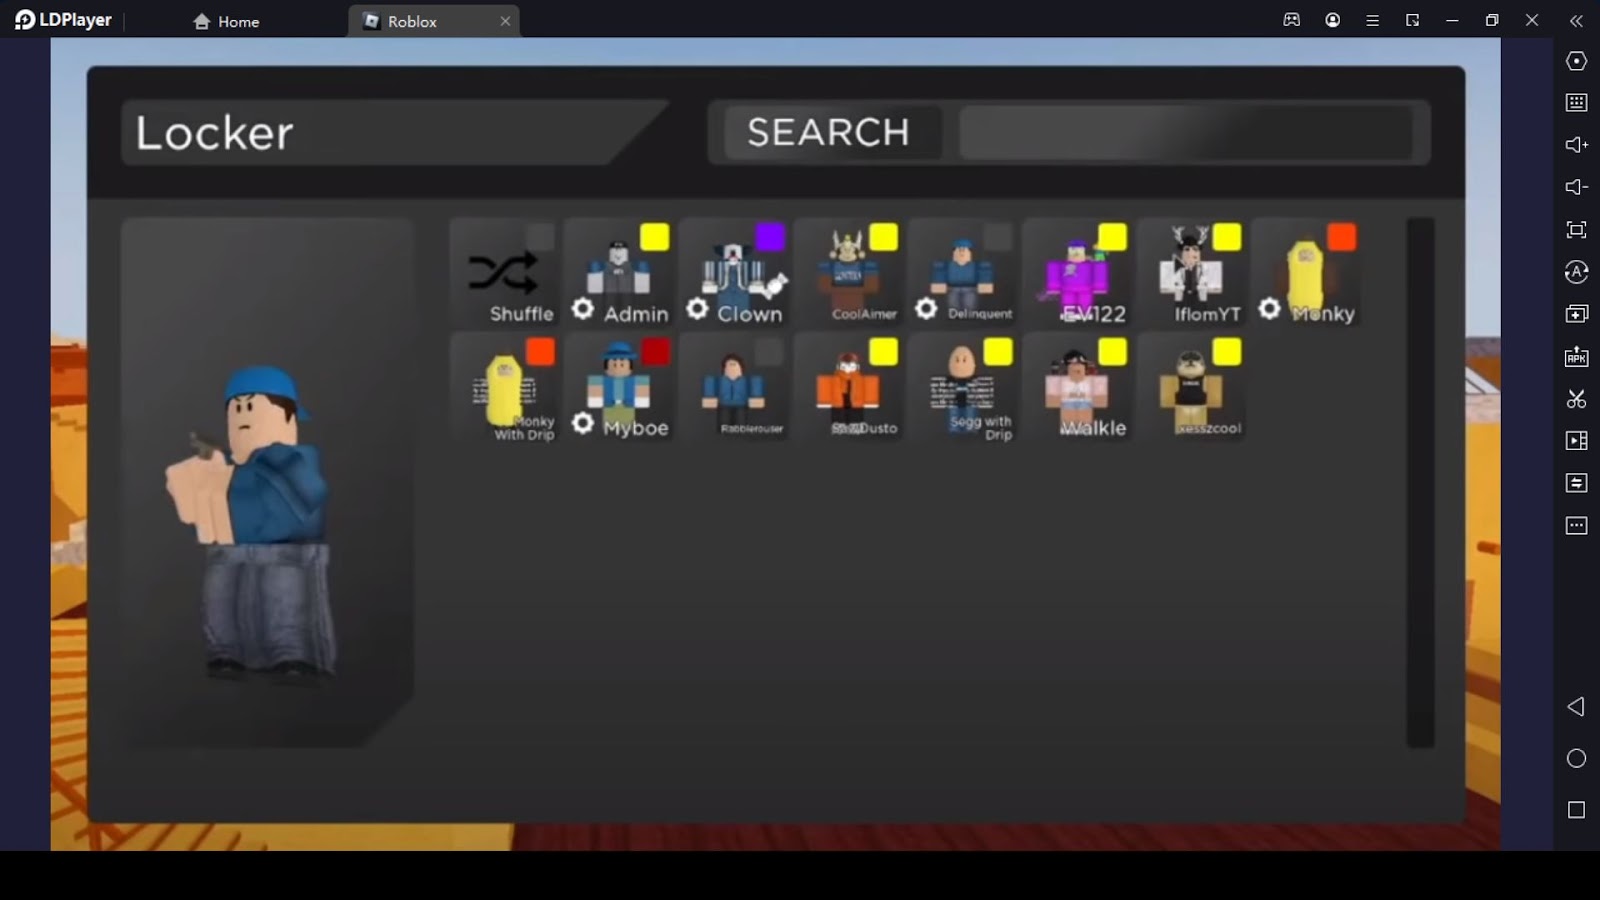 Roblox Arsenal Beginner Guide for Character Customization